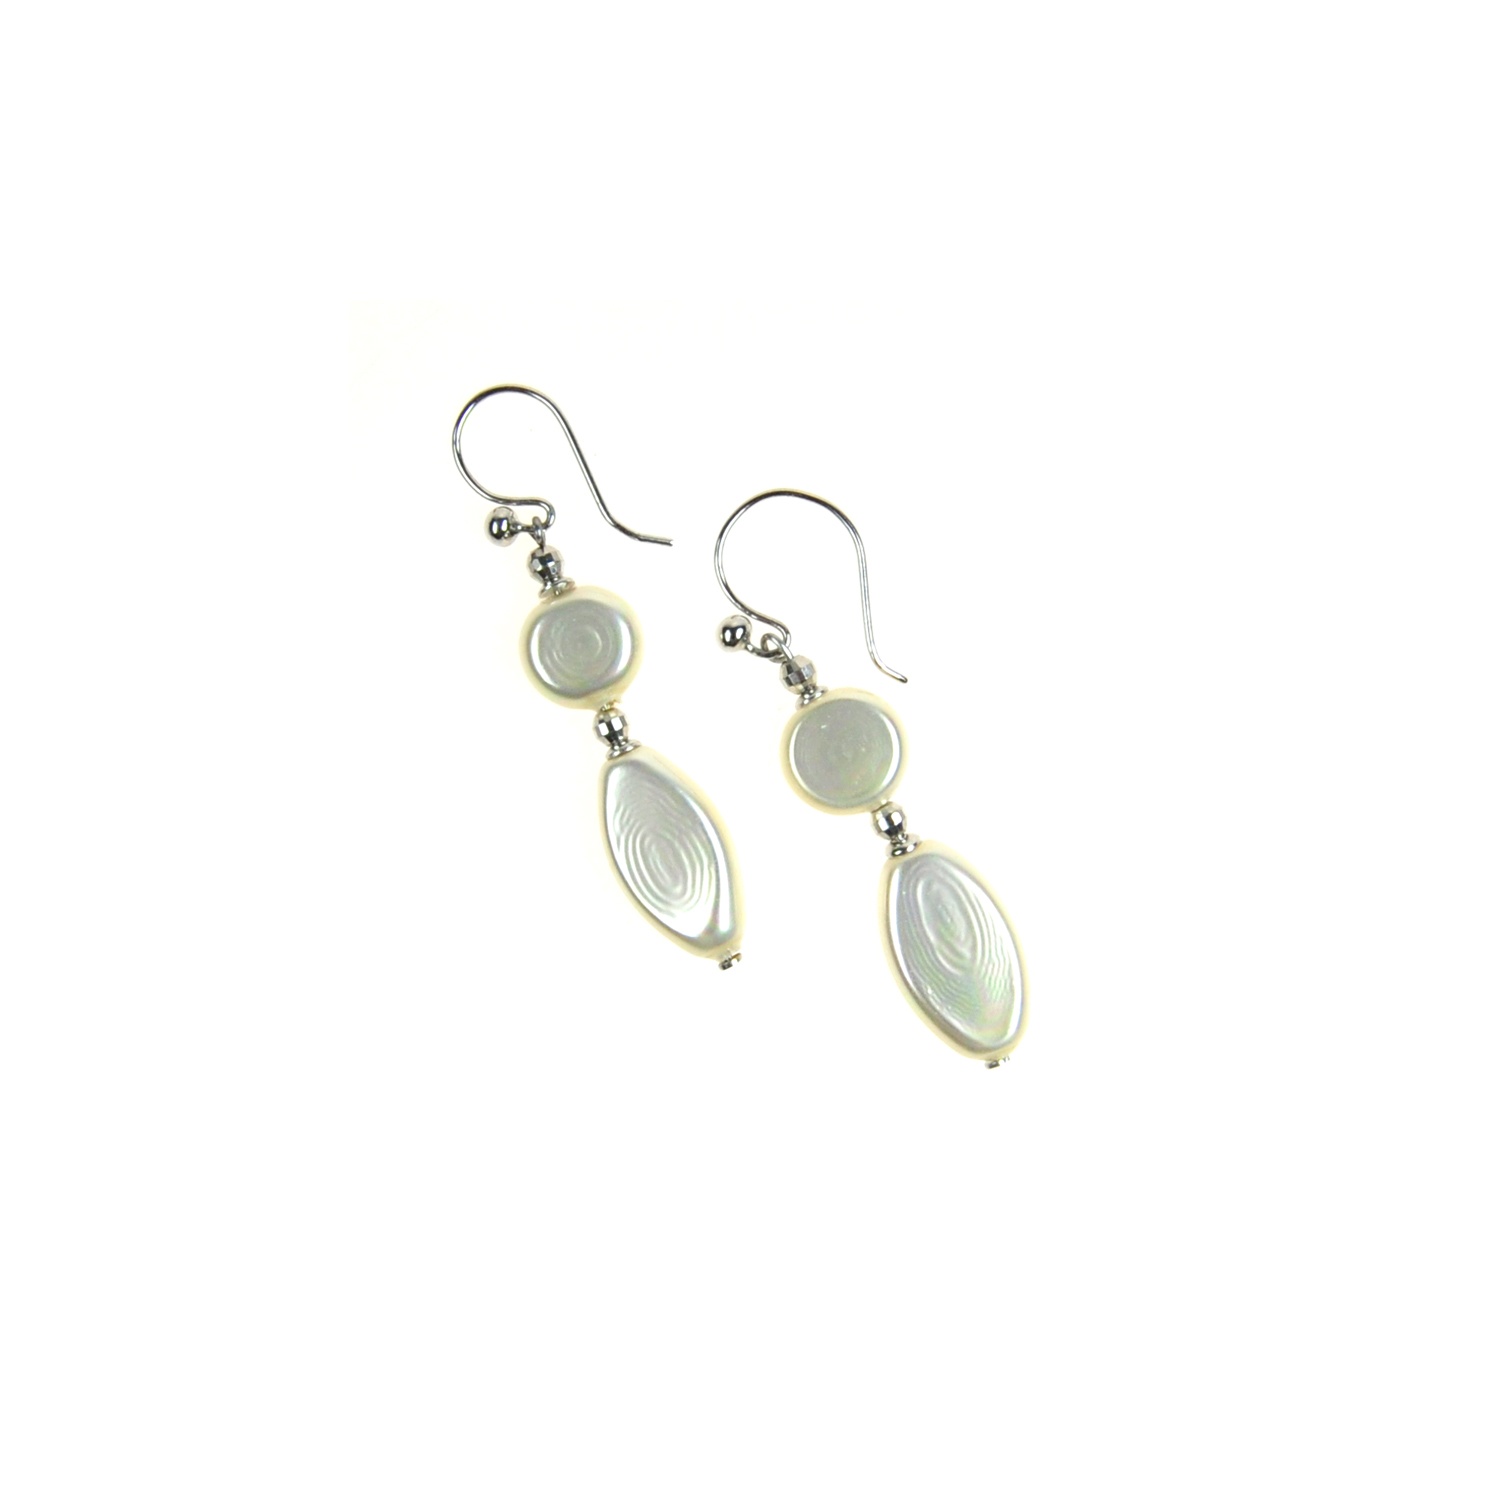 Silver earrings with oval pearls